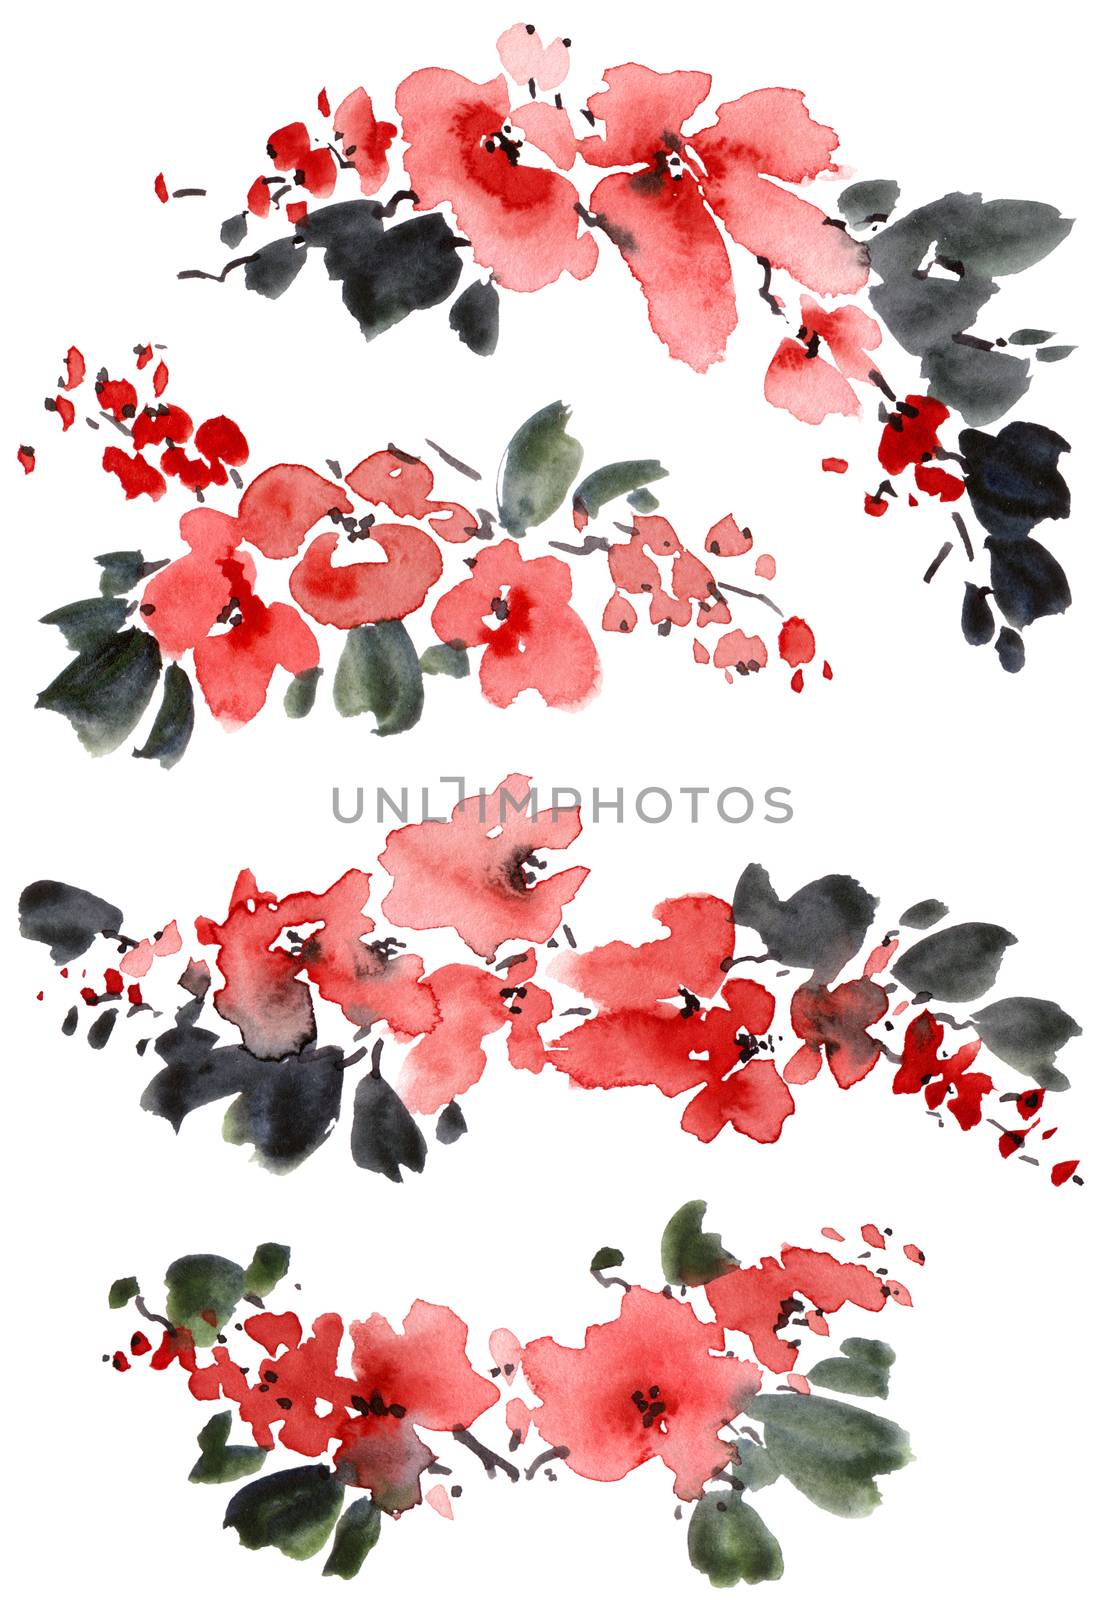 Watercolor and ink illustration of sakura tree with flowers and leaves. Oriental traditional painting in style sumi-e, u-sin and gohua.